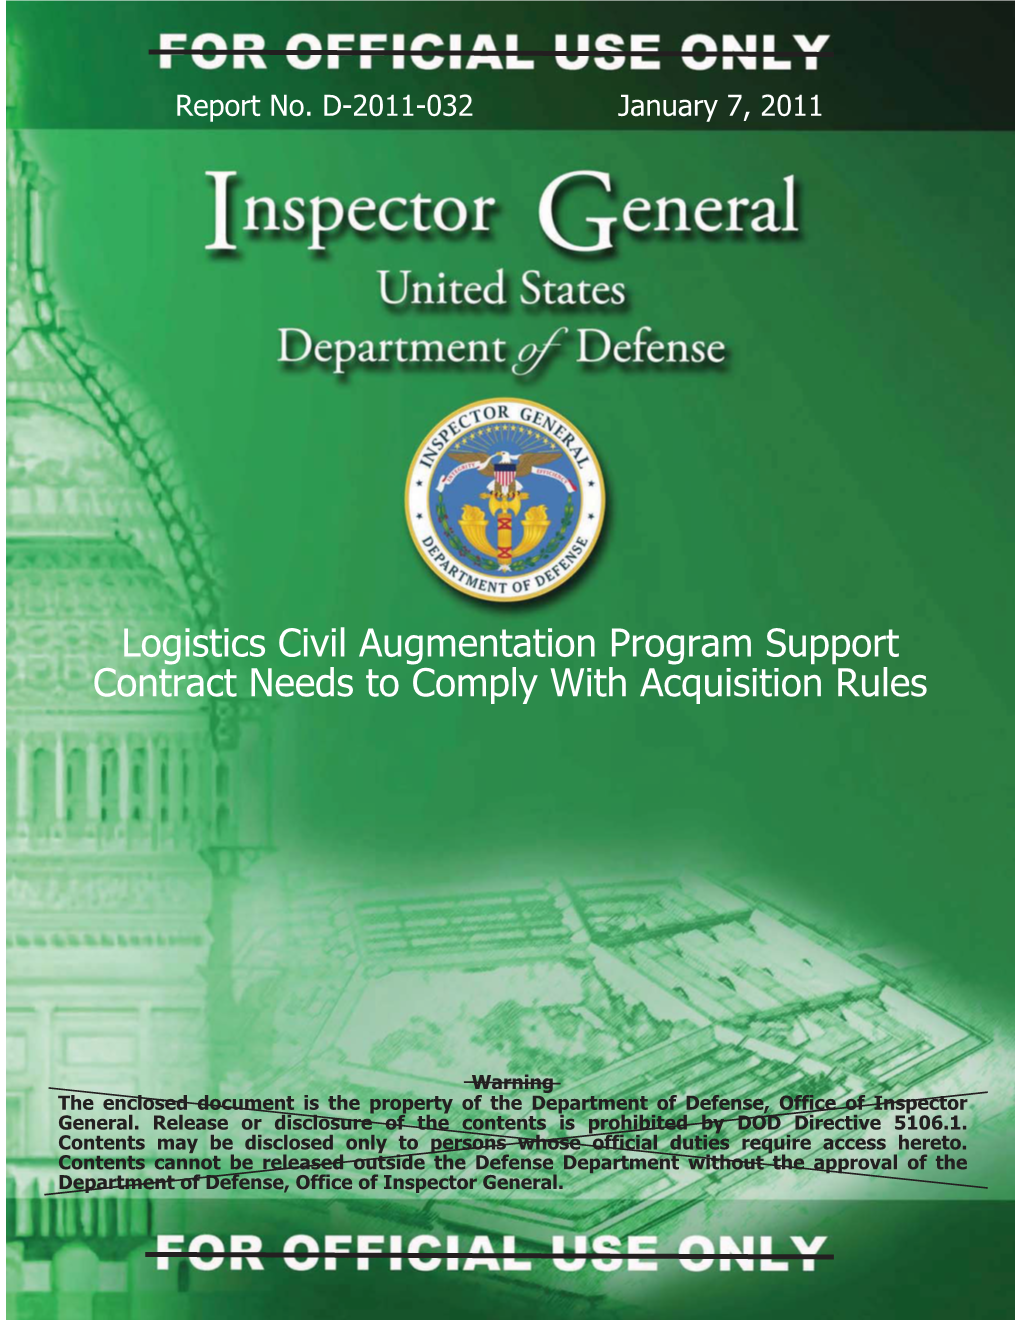 Logistics Civil Augmentation Program Support Contract Needs to Comply with Acquisition Rules